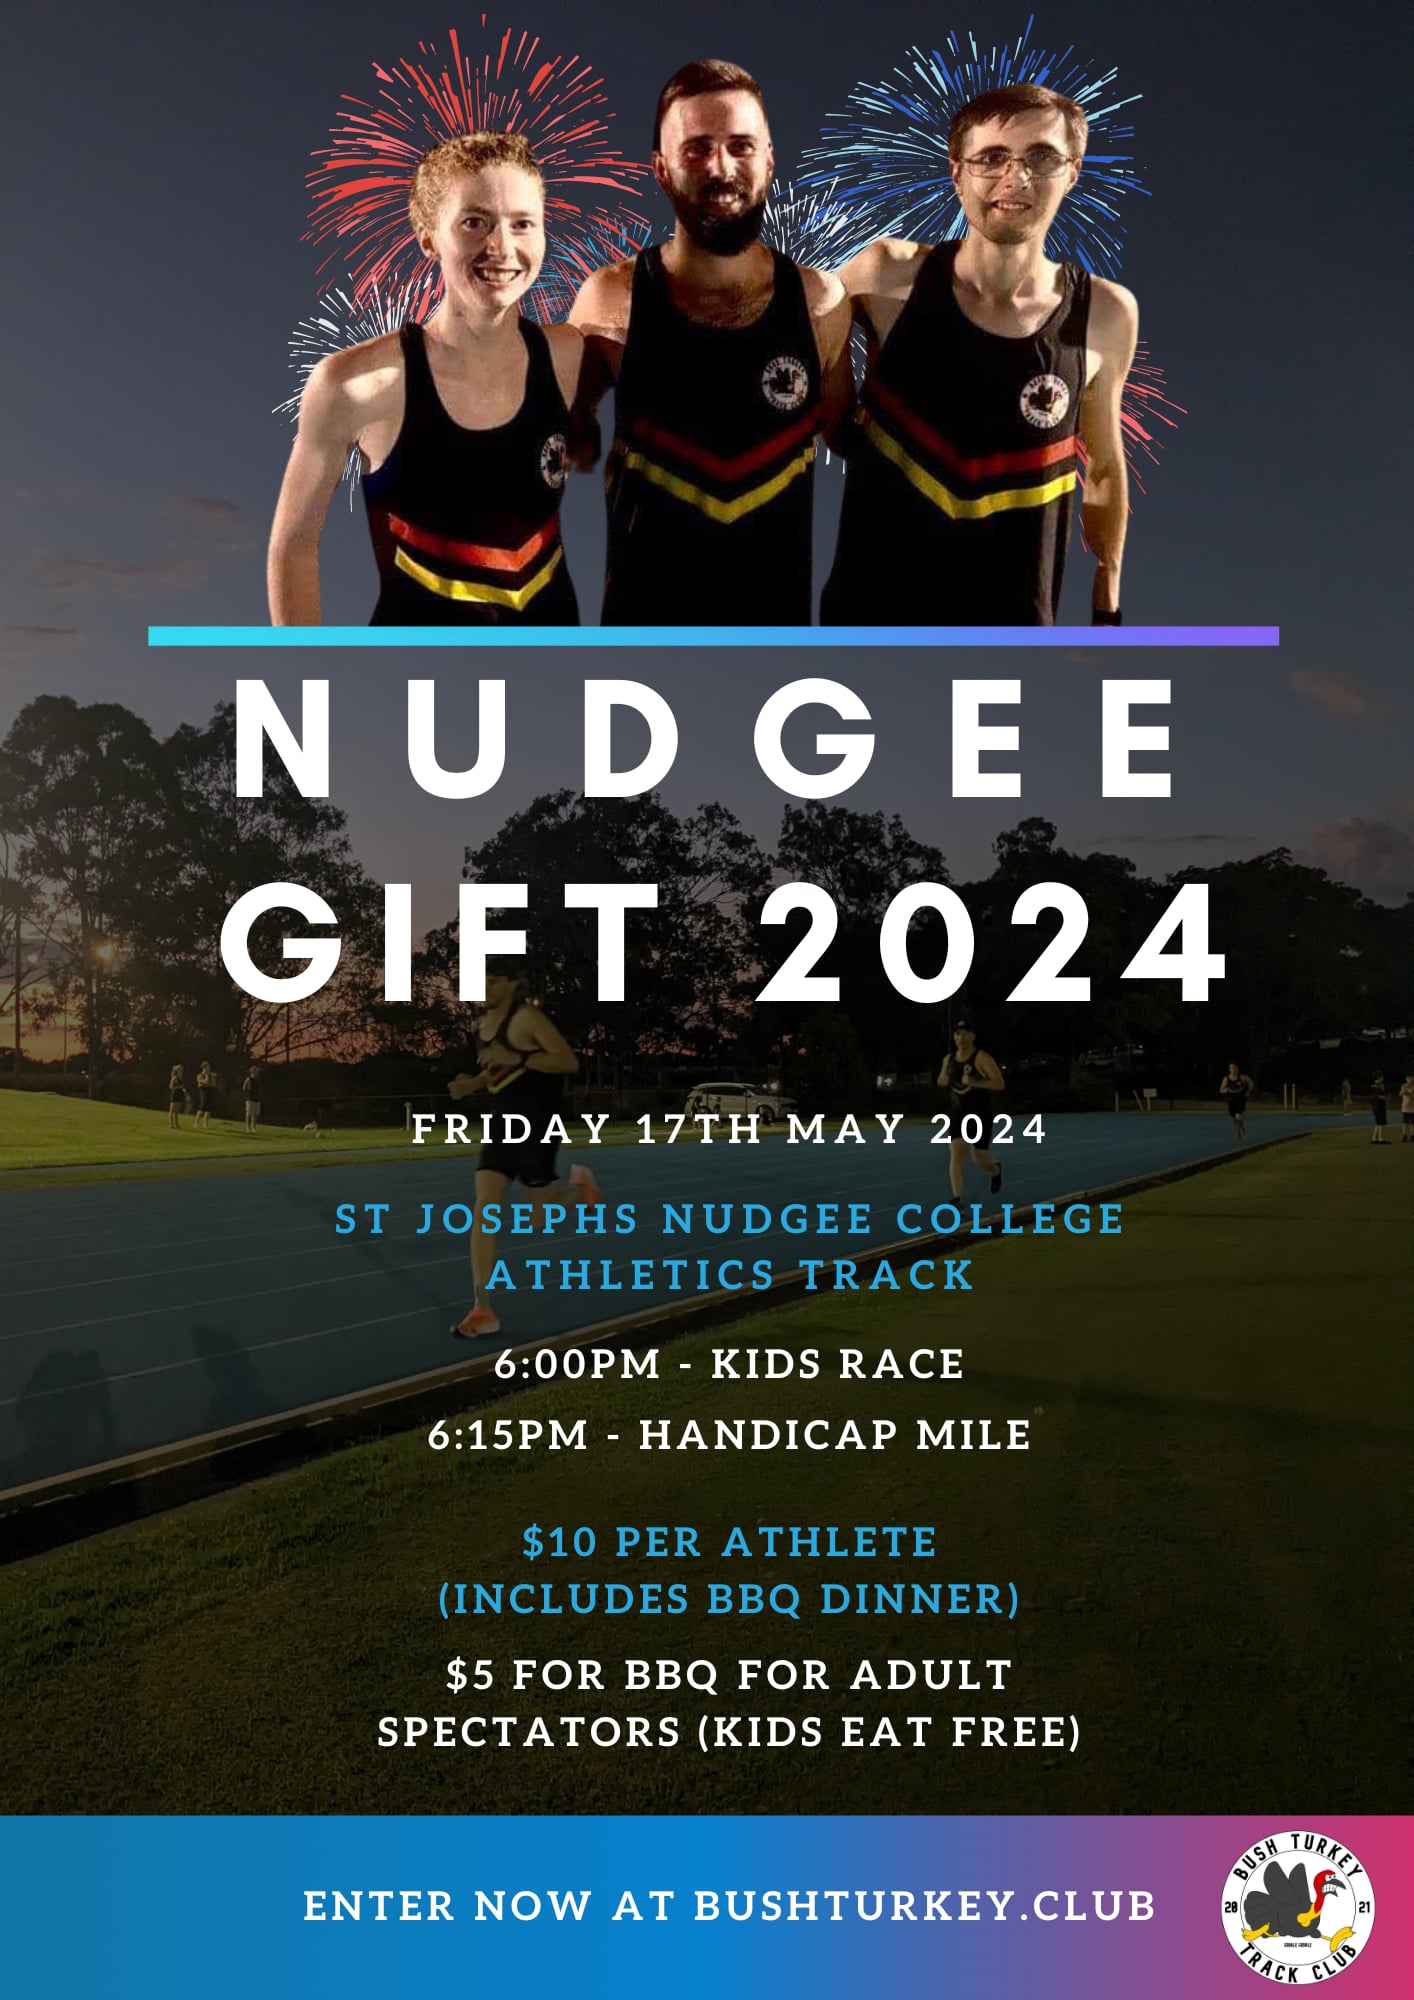 Events Nudgee Gift 2024